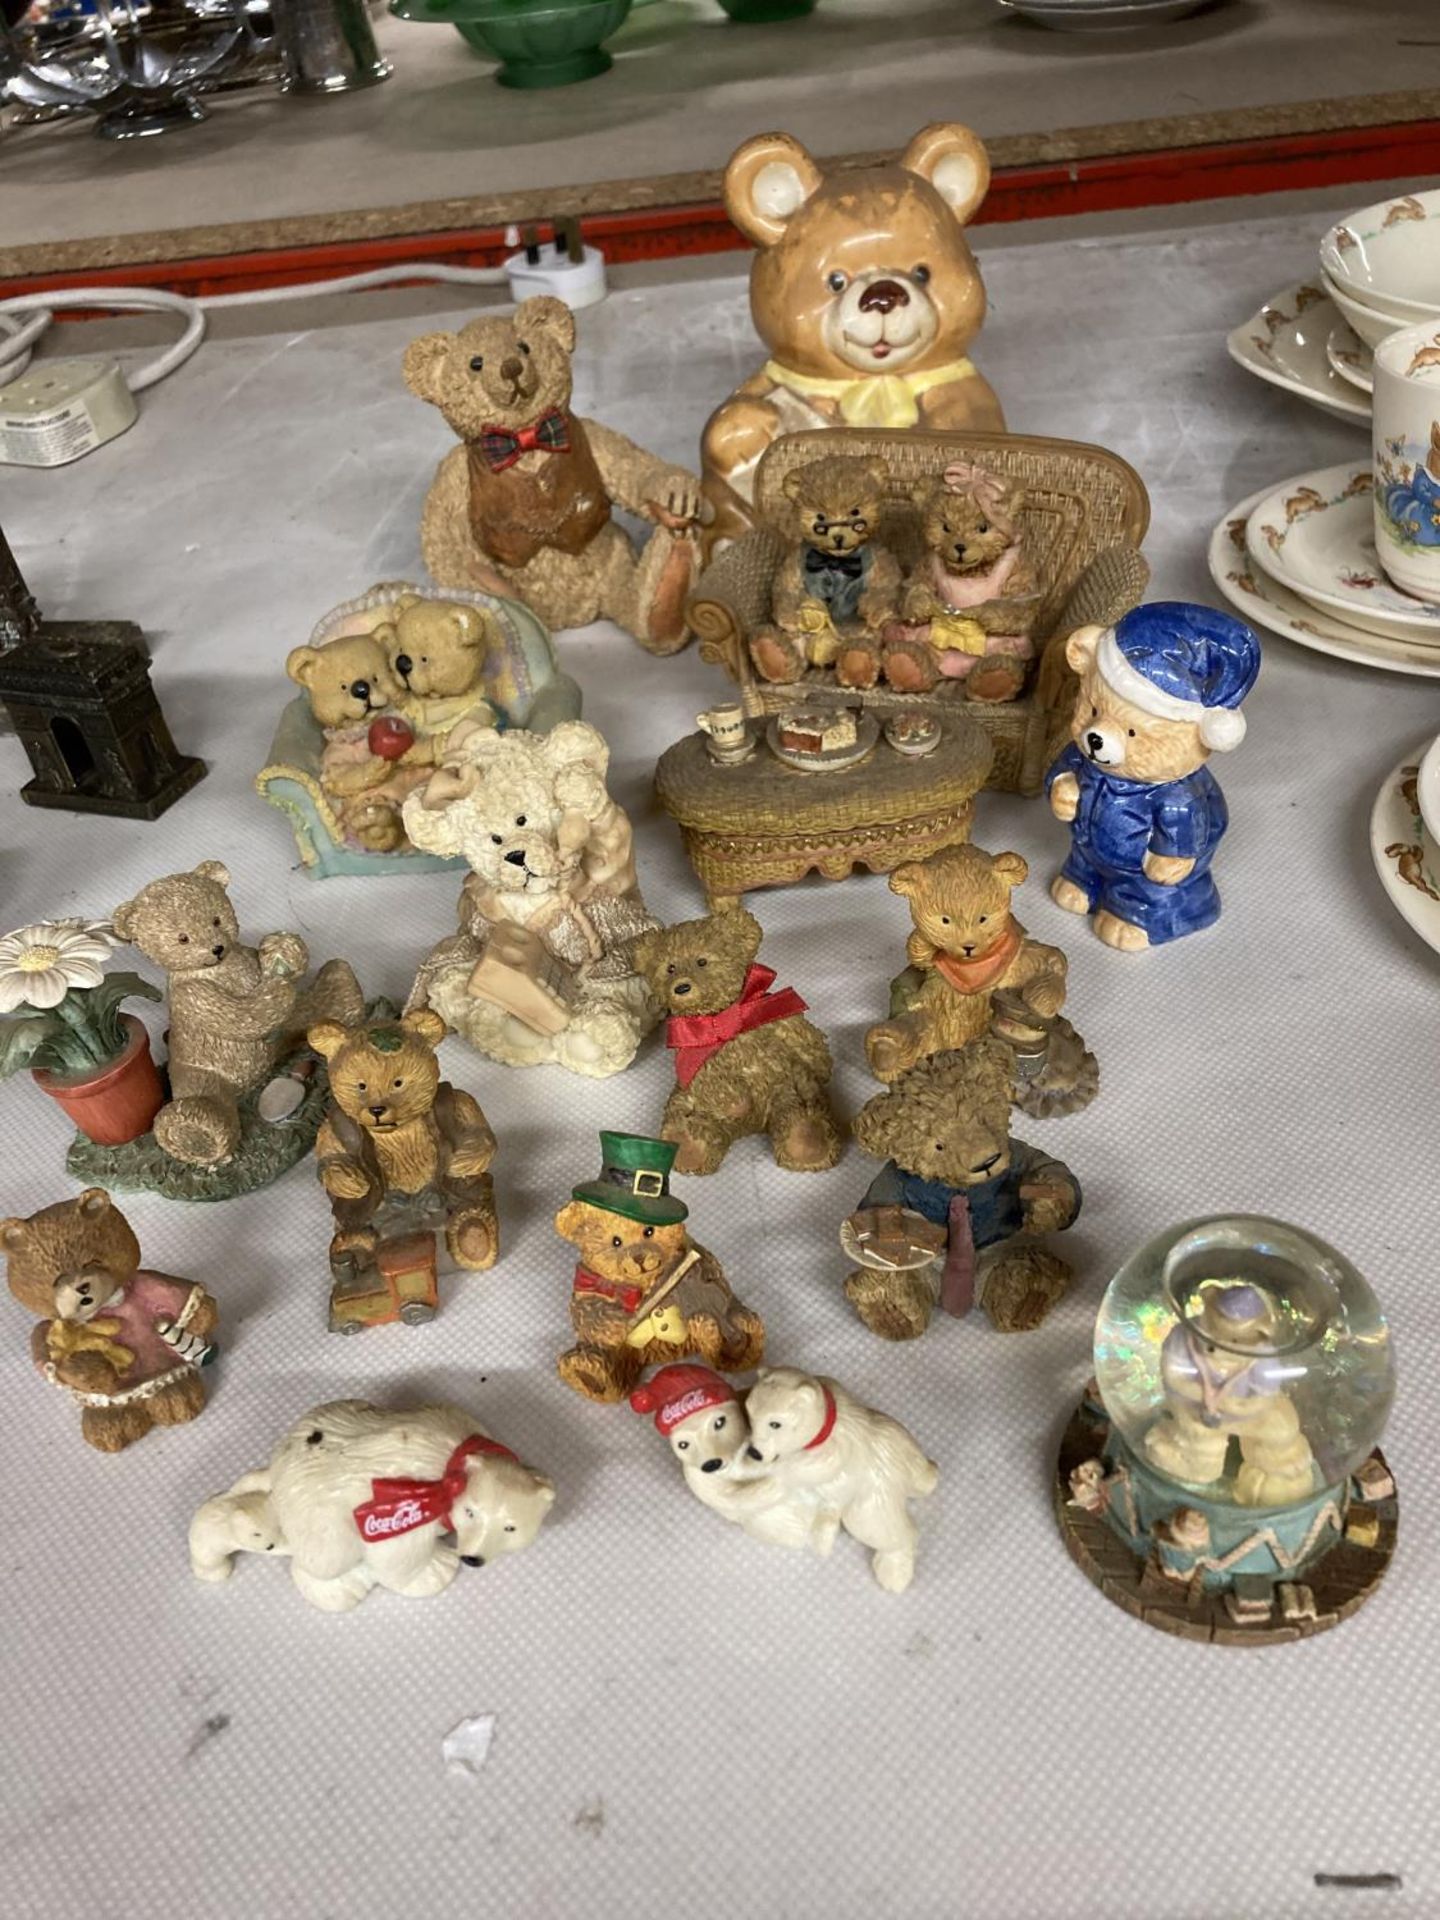 A LARGE COLLECTION OF RESIN TEDDY BEAR FIGURES